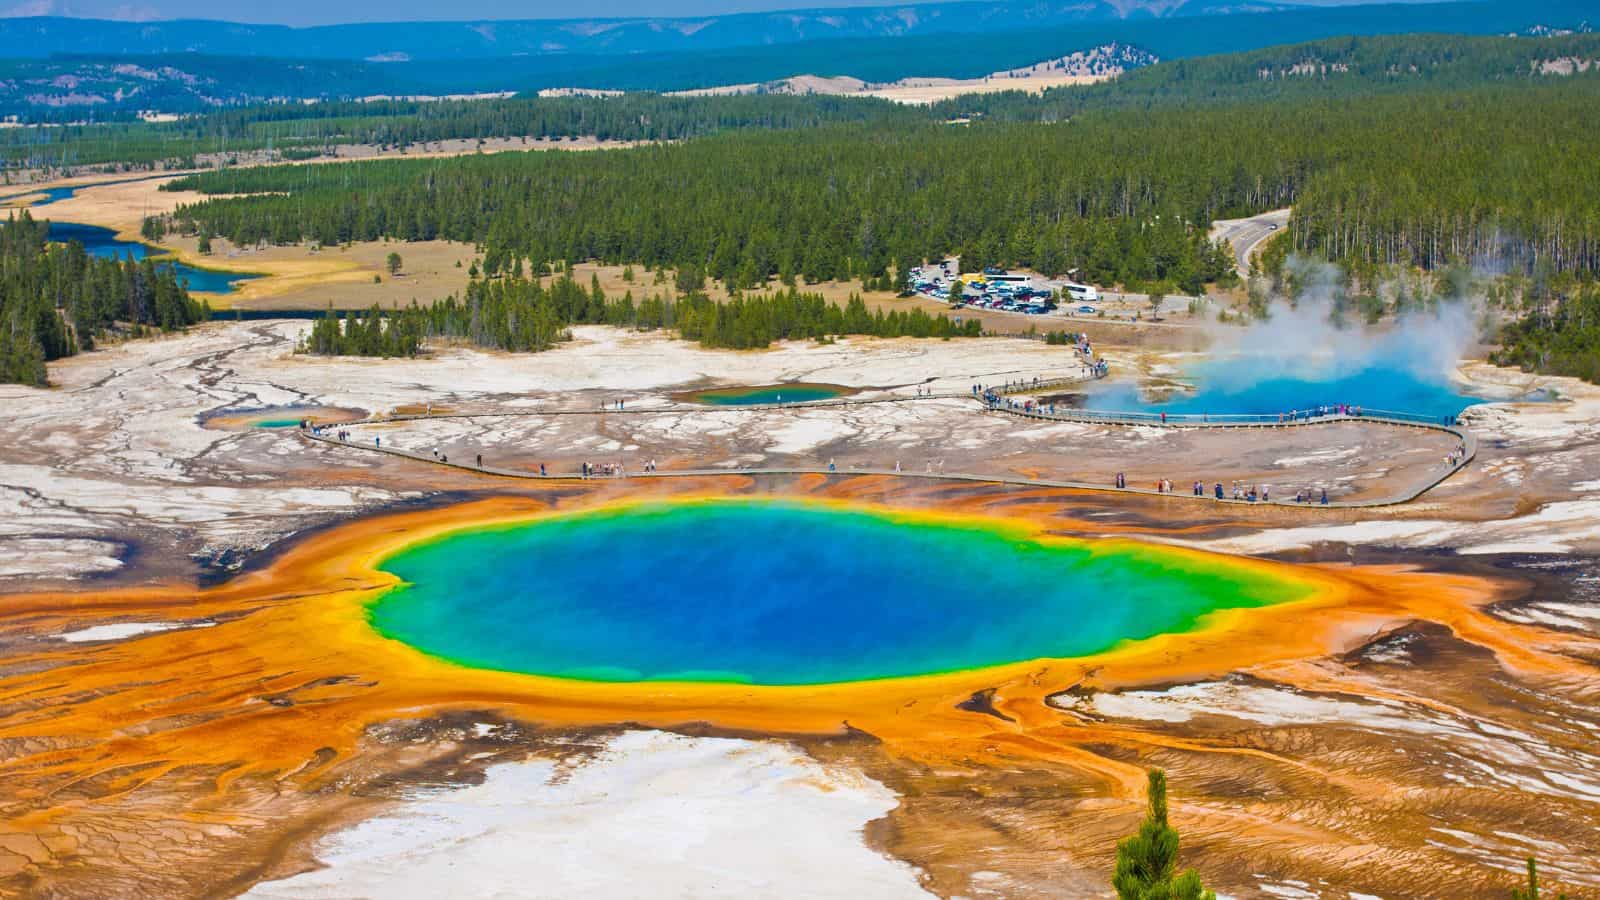 <p>Yellowstone National Park, established in 1872, was the world’s first national park. This pioneering step by the U.S. sparked a global movement in the conservation of natural beauty and wildlife.</p>